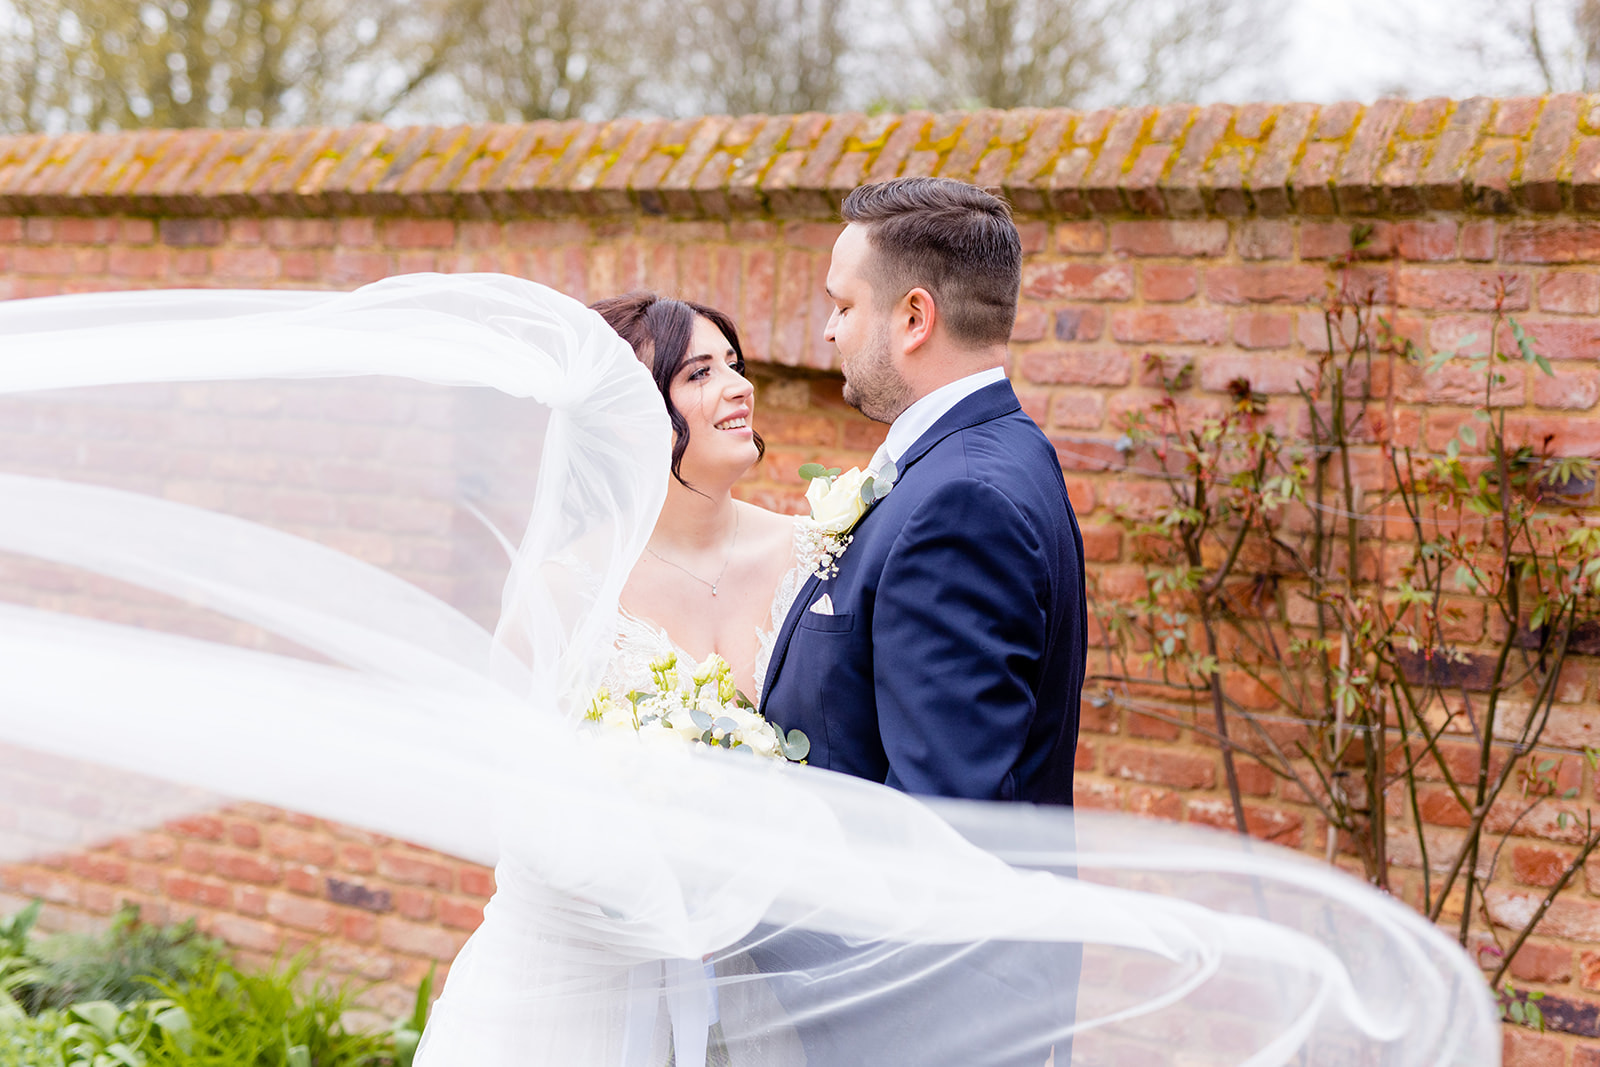 A couple who had an amazing wedding at Apton Hall standing in the Walled Garden